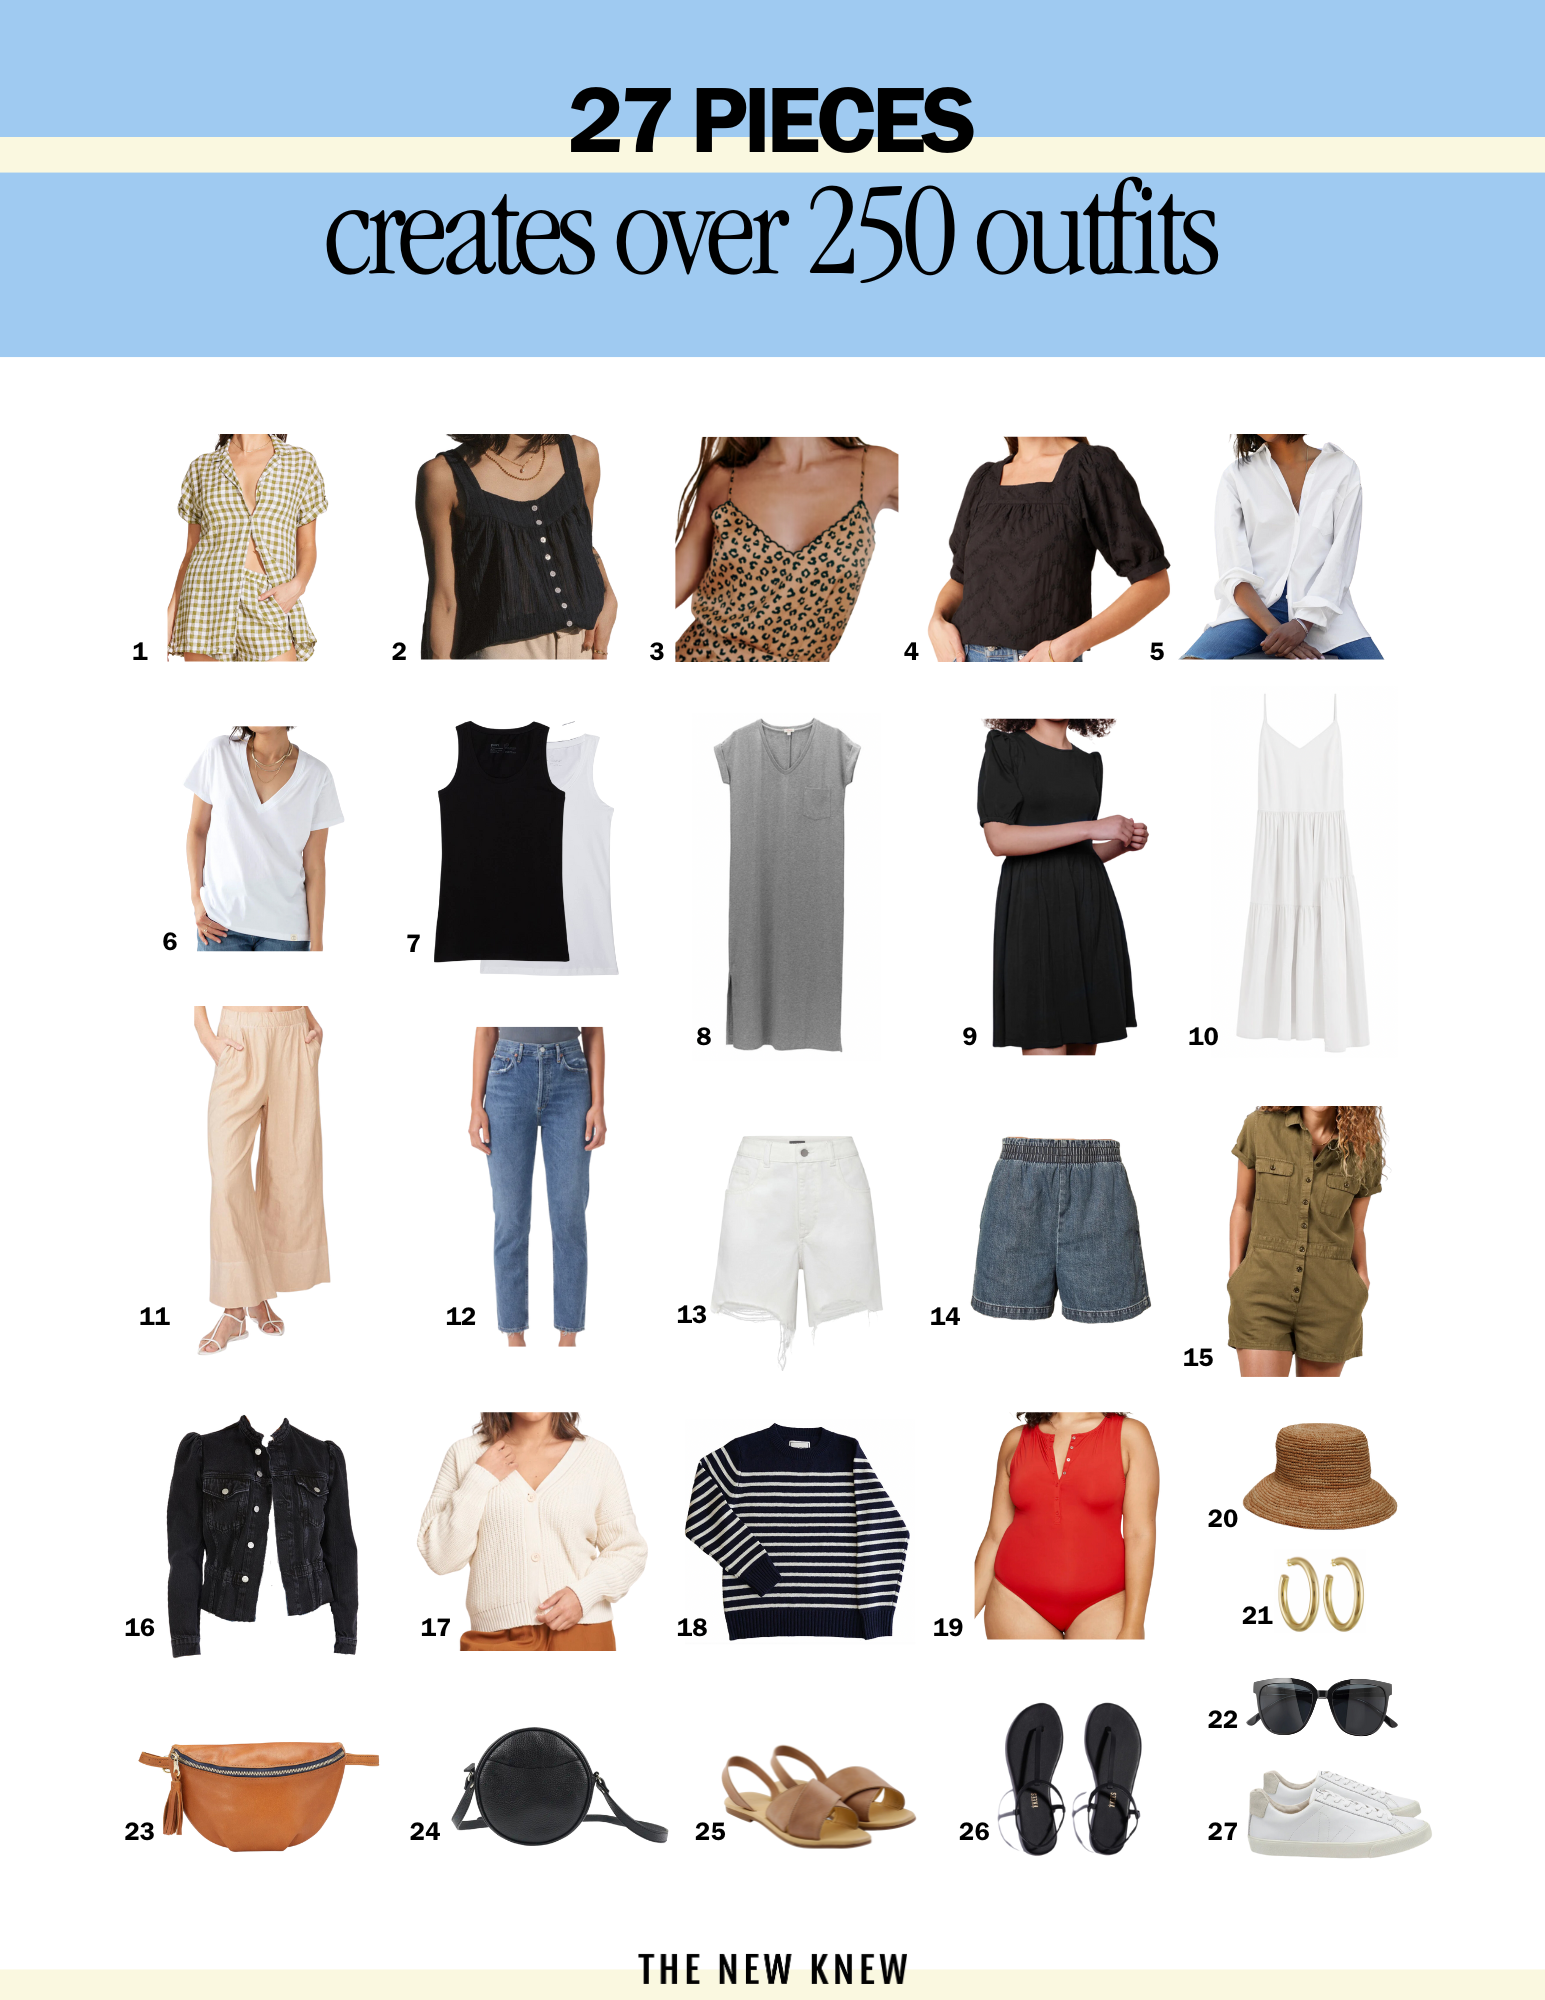 A selection of 27 clothing items to create over 250 outfits. 